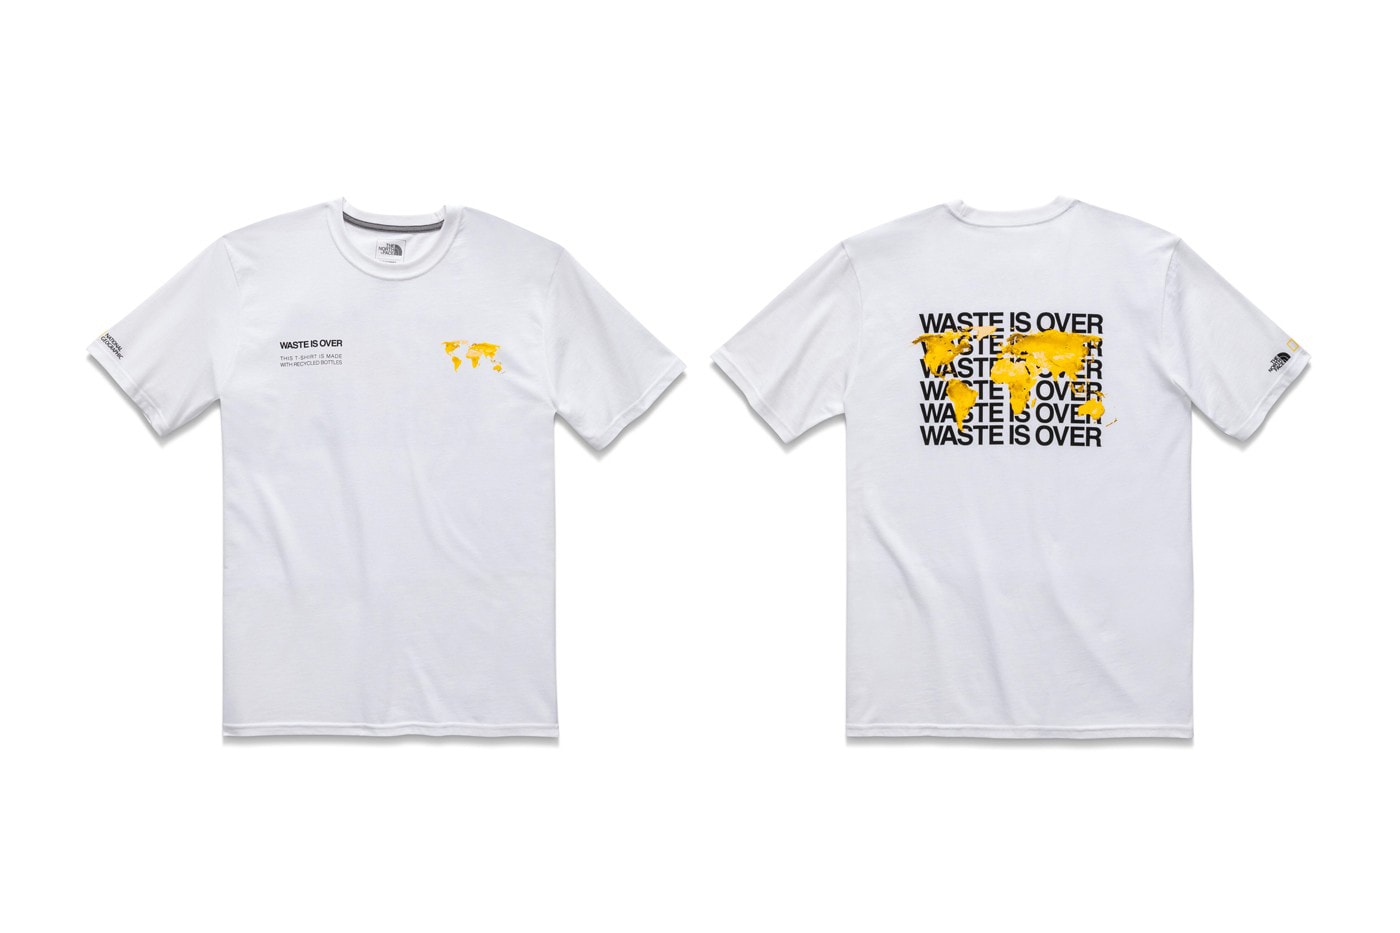 The North Face x National Geographic Bottle Source Collection T Shirt White